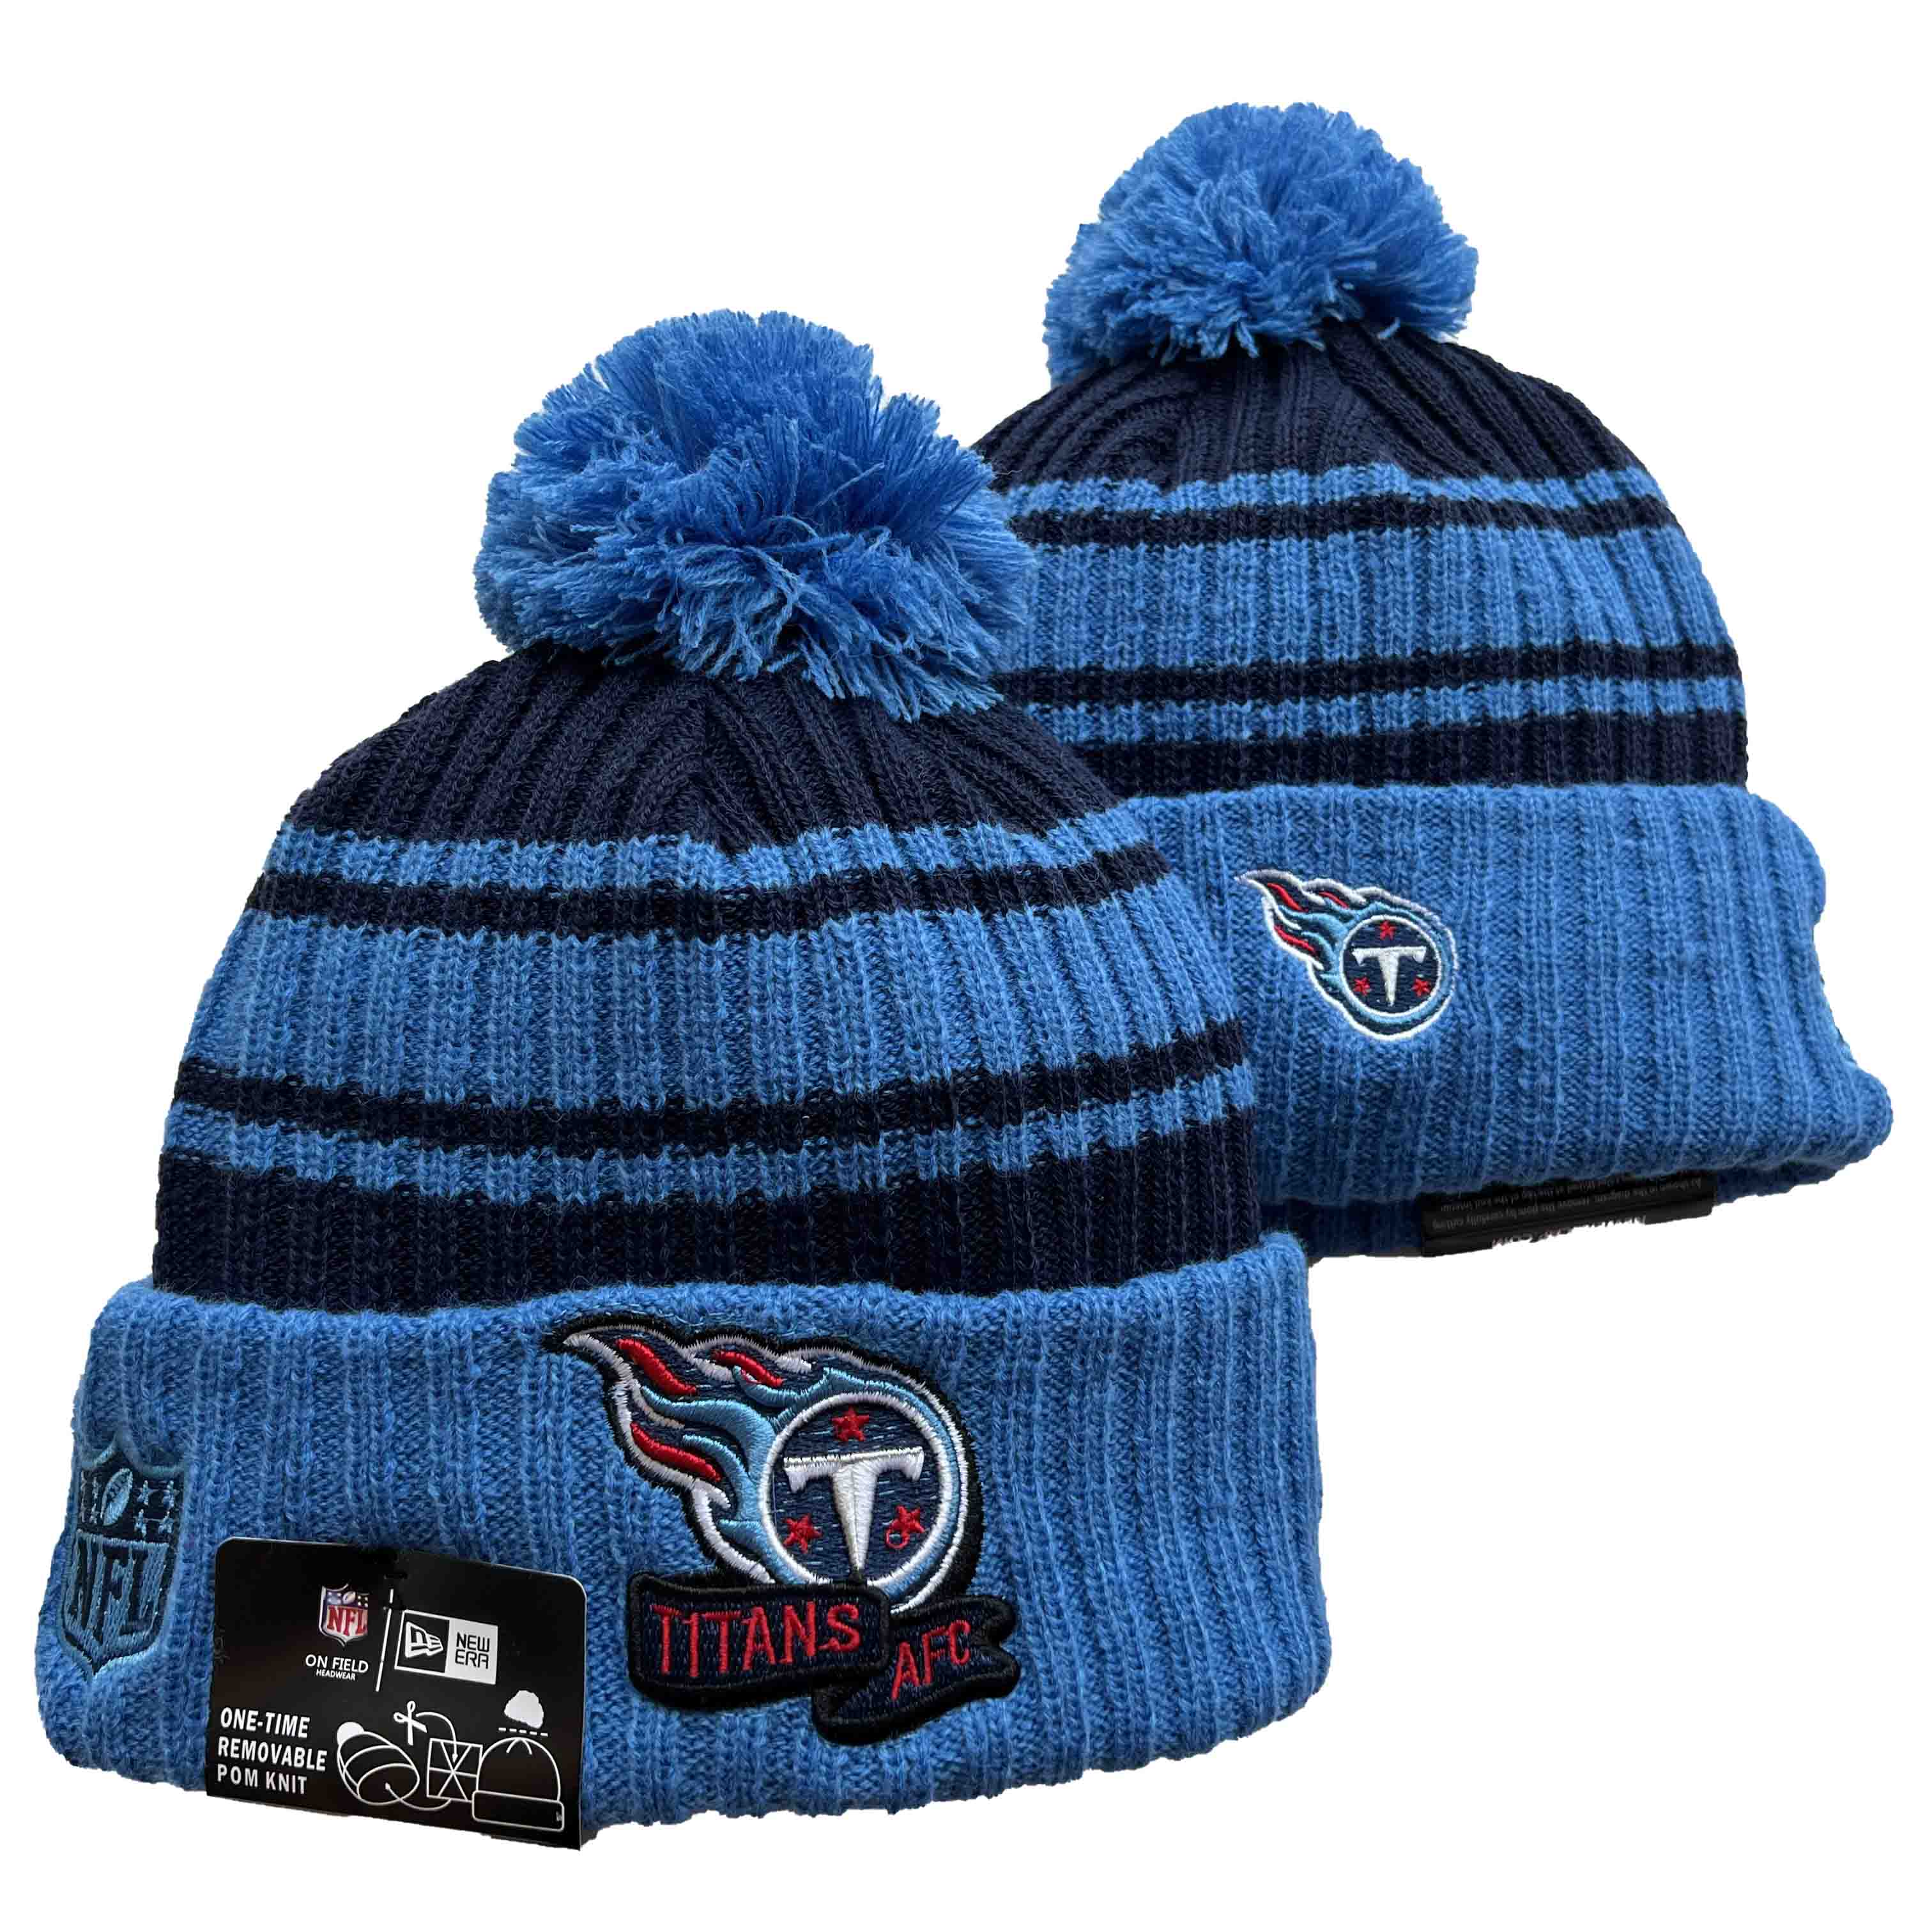 Tennessee Titans Knit Hats -4